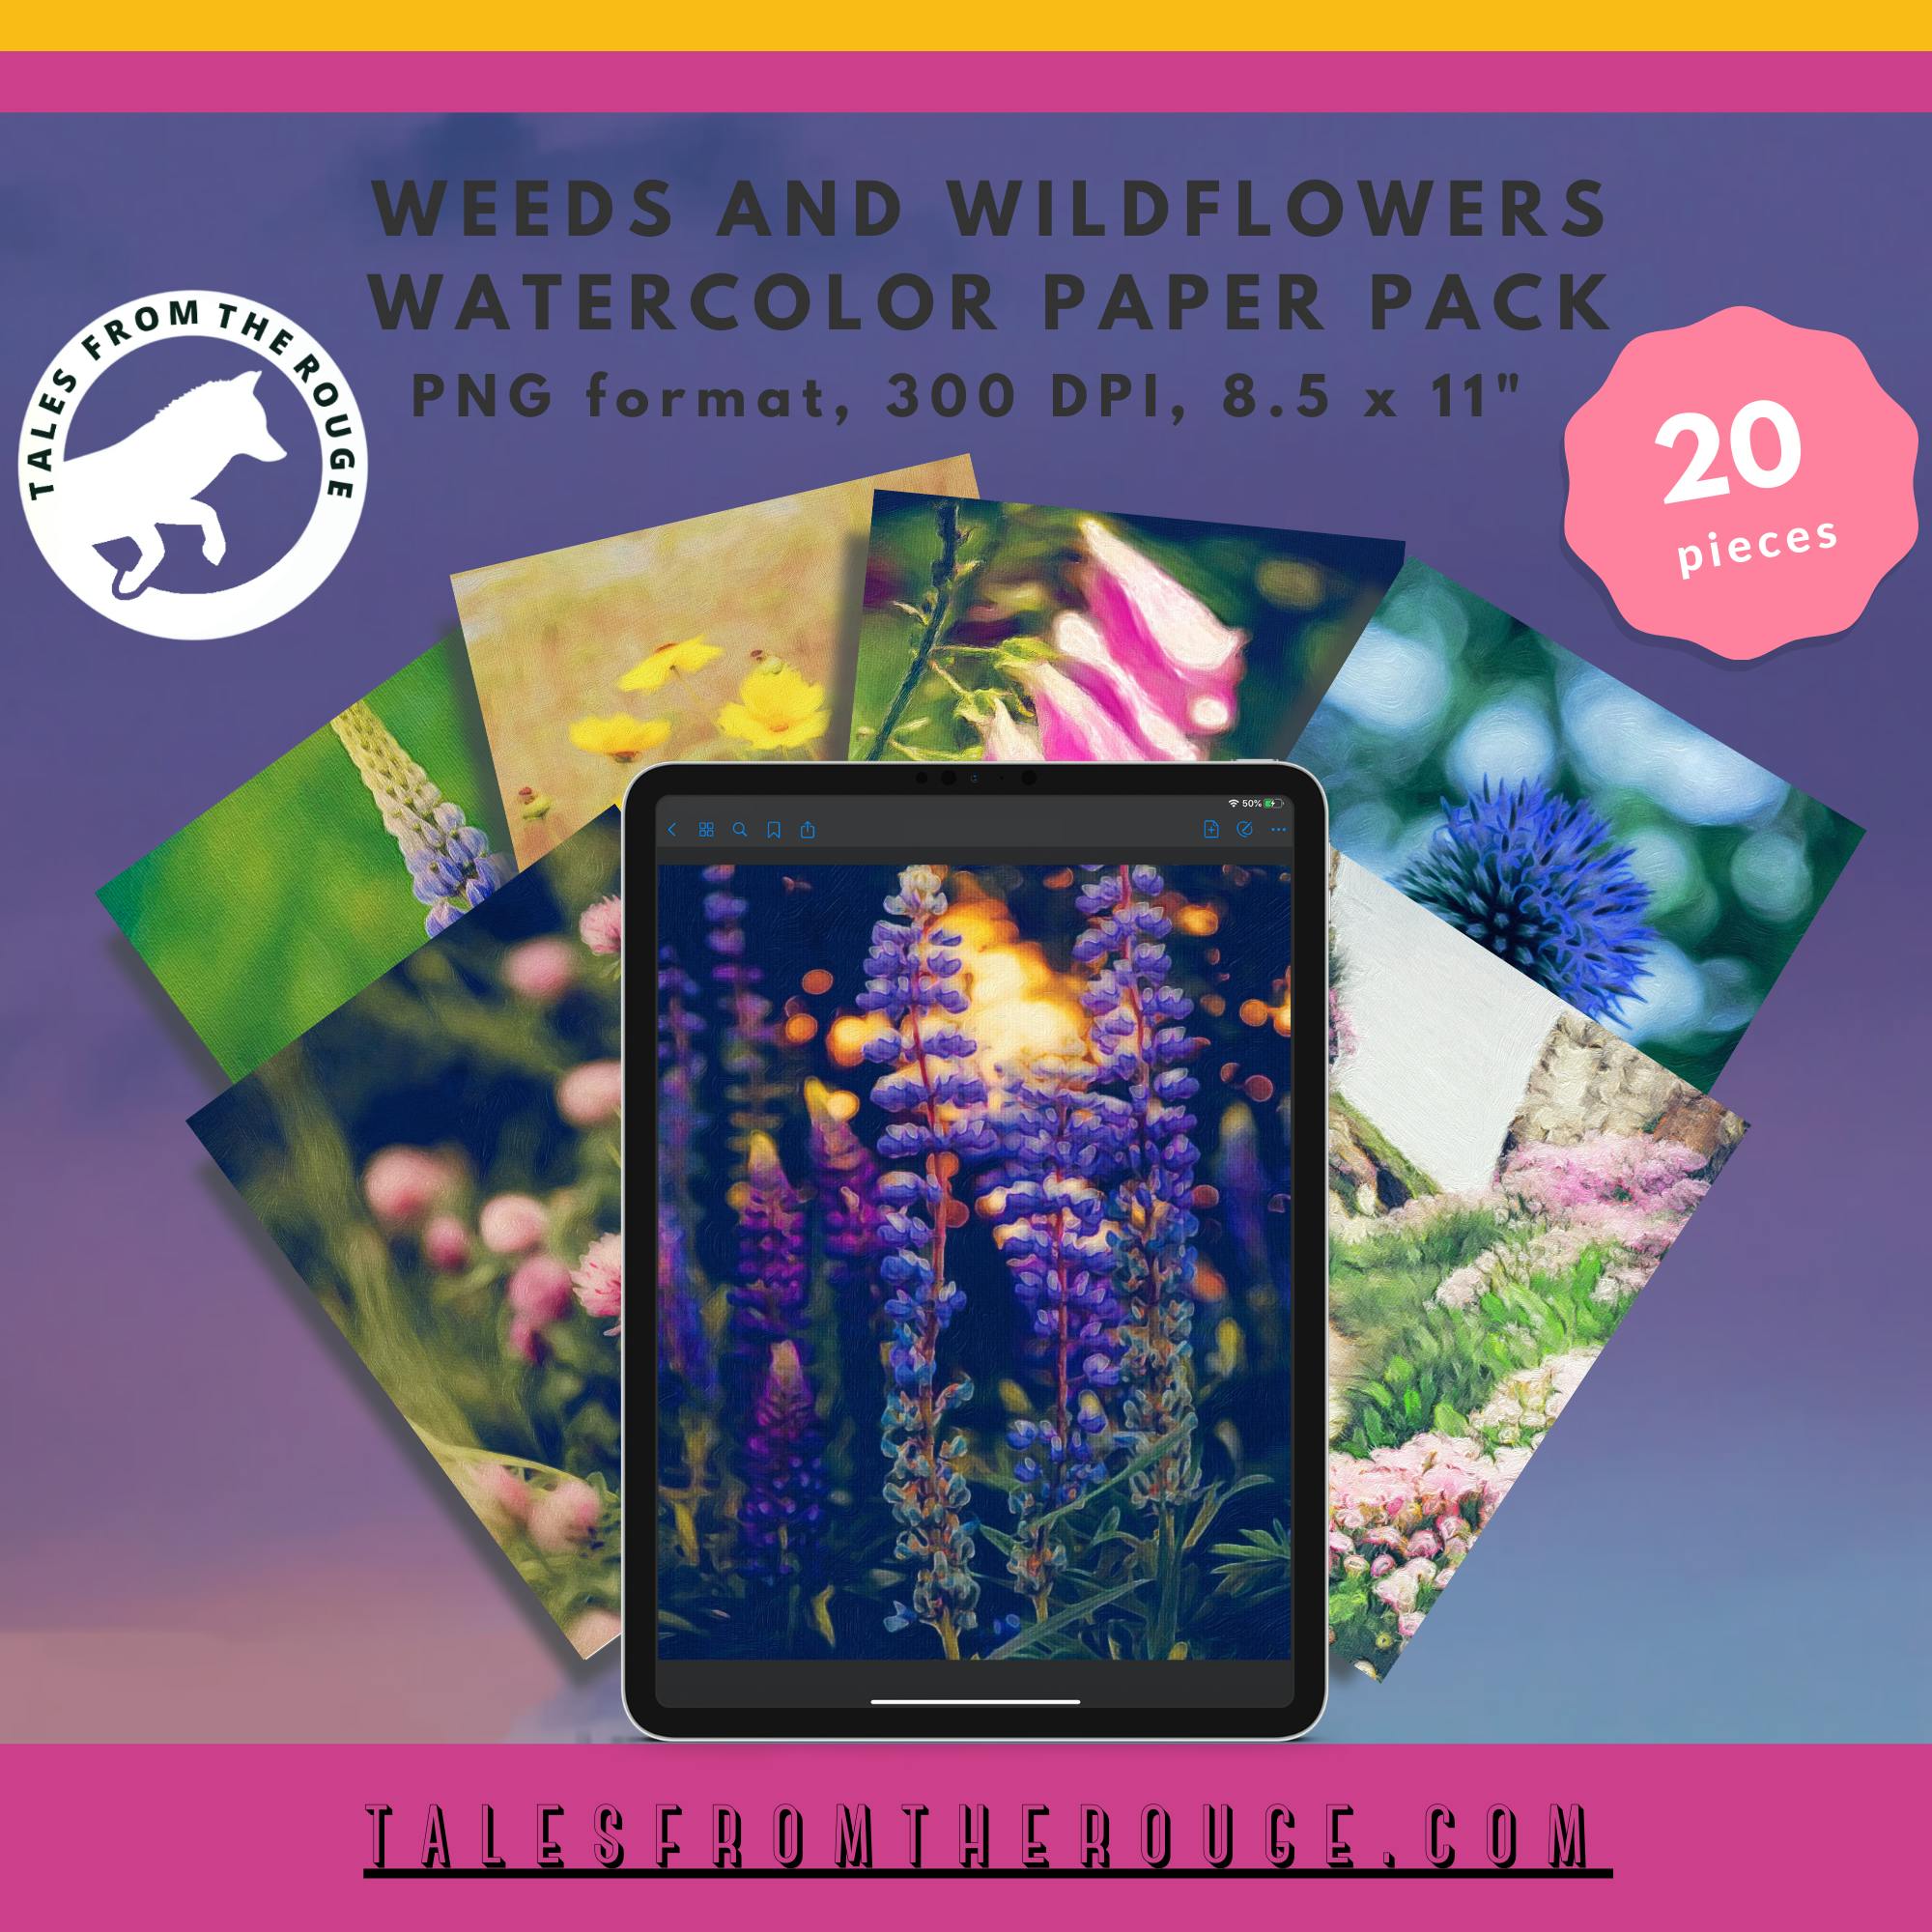 Weeds + Wildflowers Watercolor Paper Pack (20 pieces. Commercial Use)